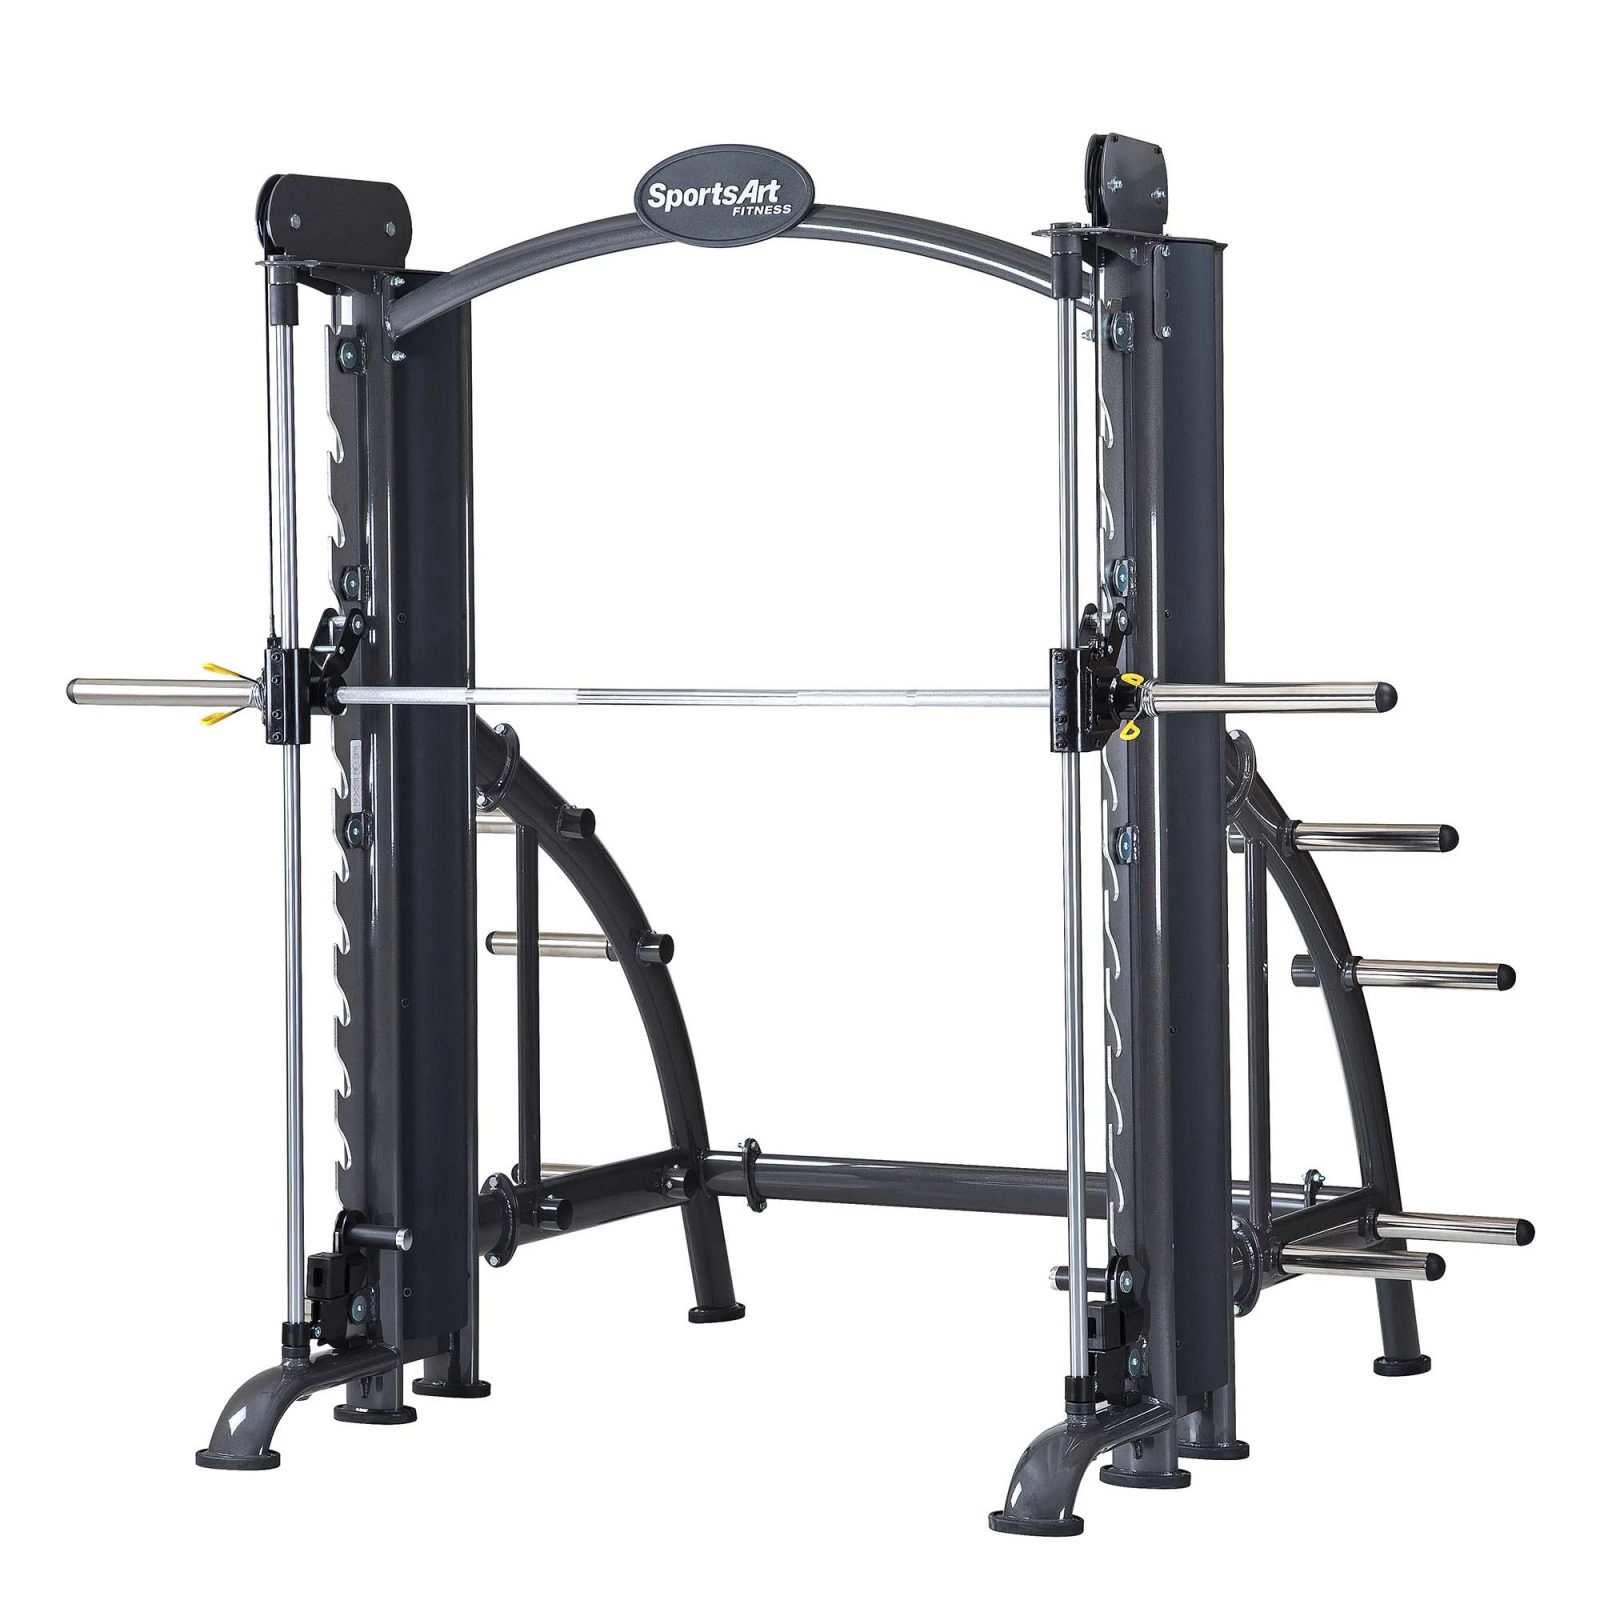 SportsArt A983 Plate Loaded Smith Machine (New)